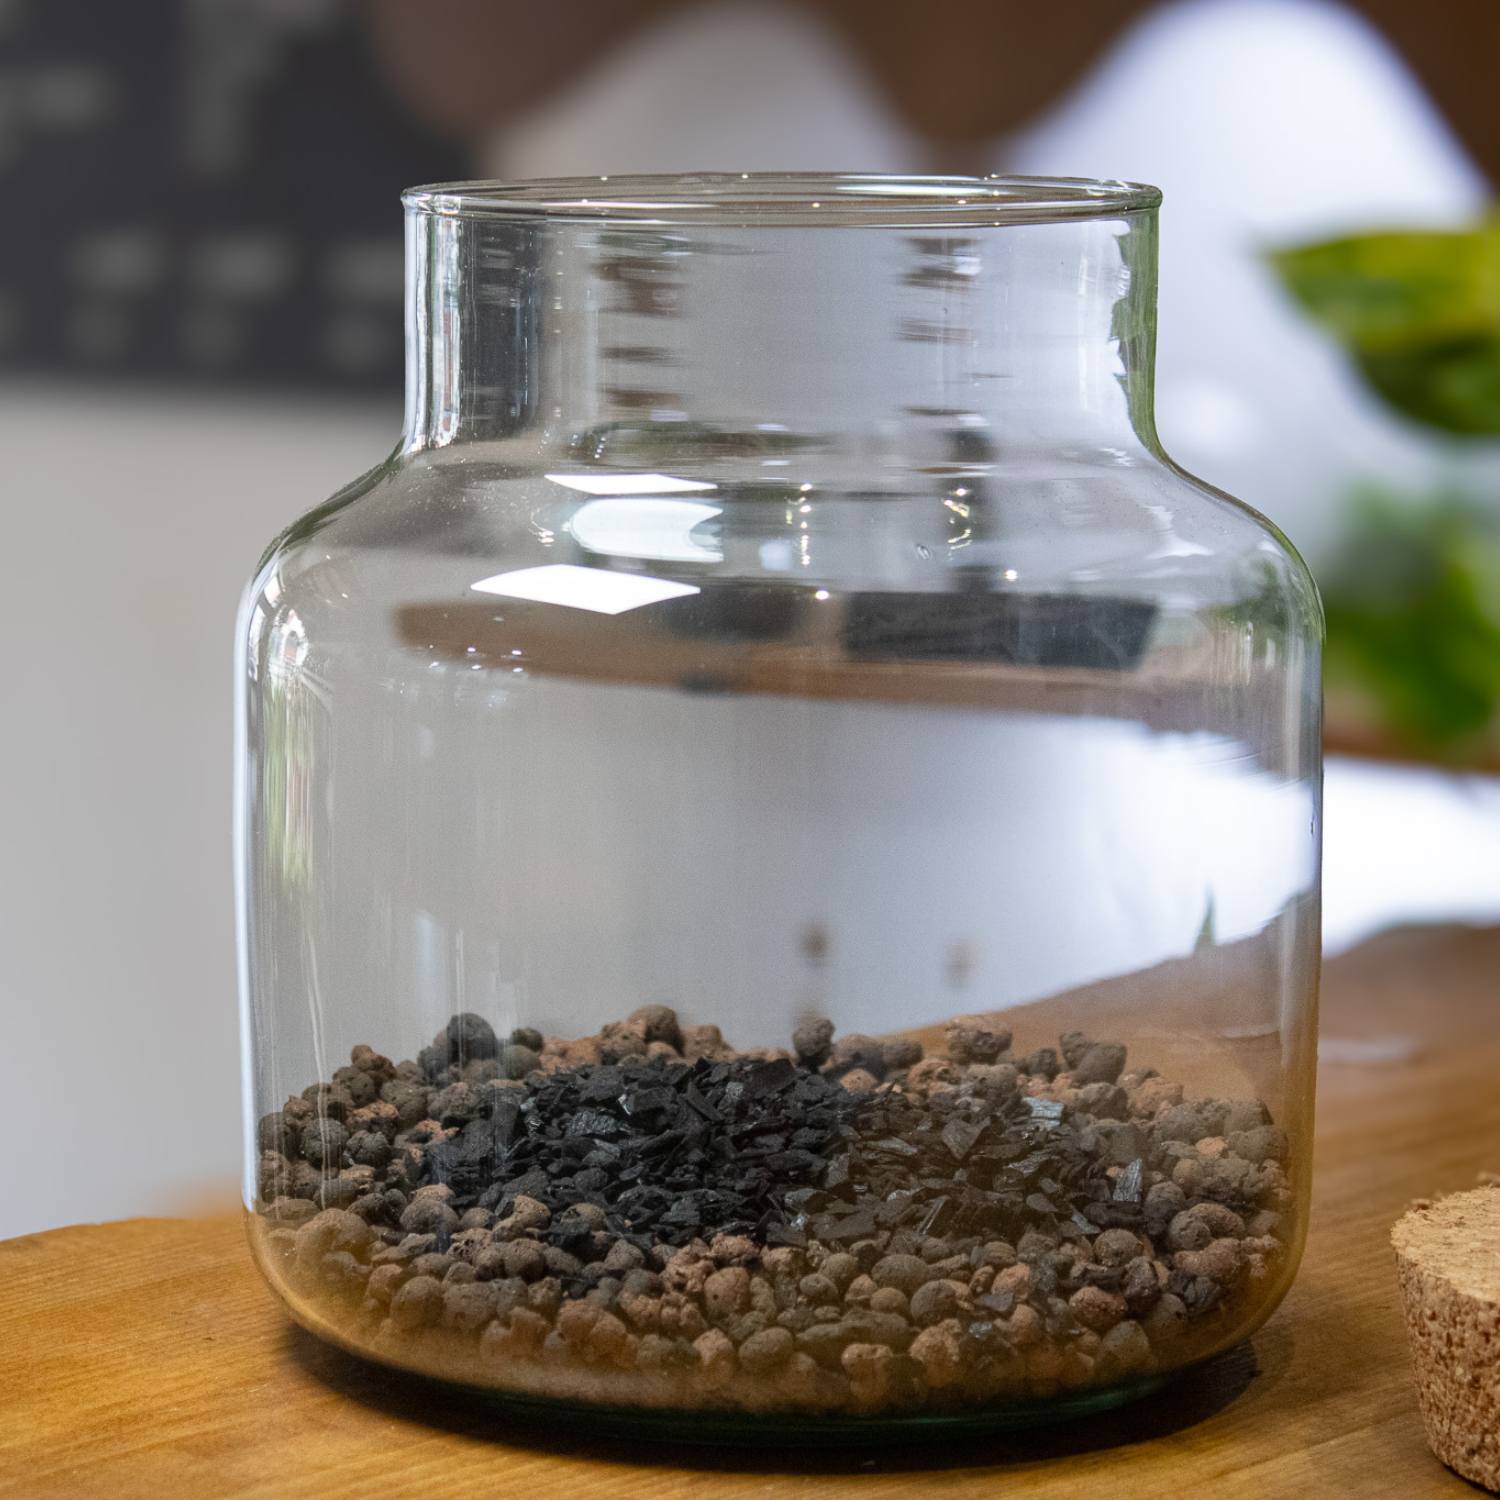 Activated charcoal layer in terrariums